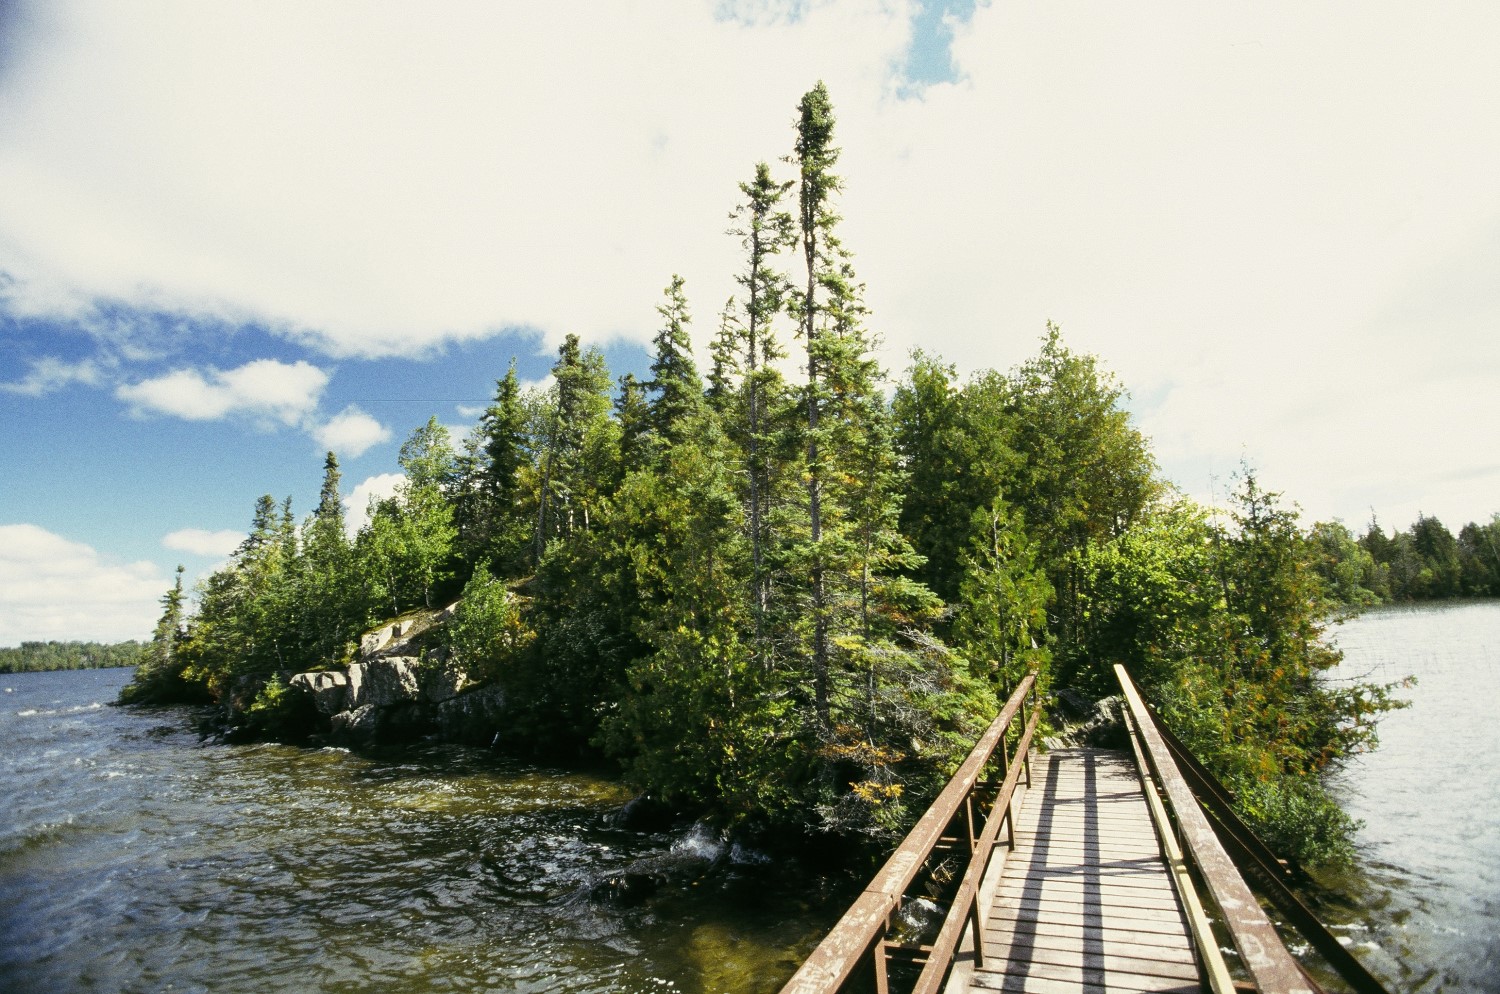 A narrow wooden pedestrian bridge over water leading to a small, wooded island under a sunny sky.